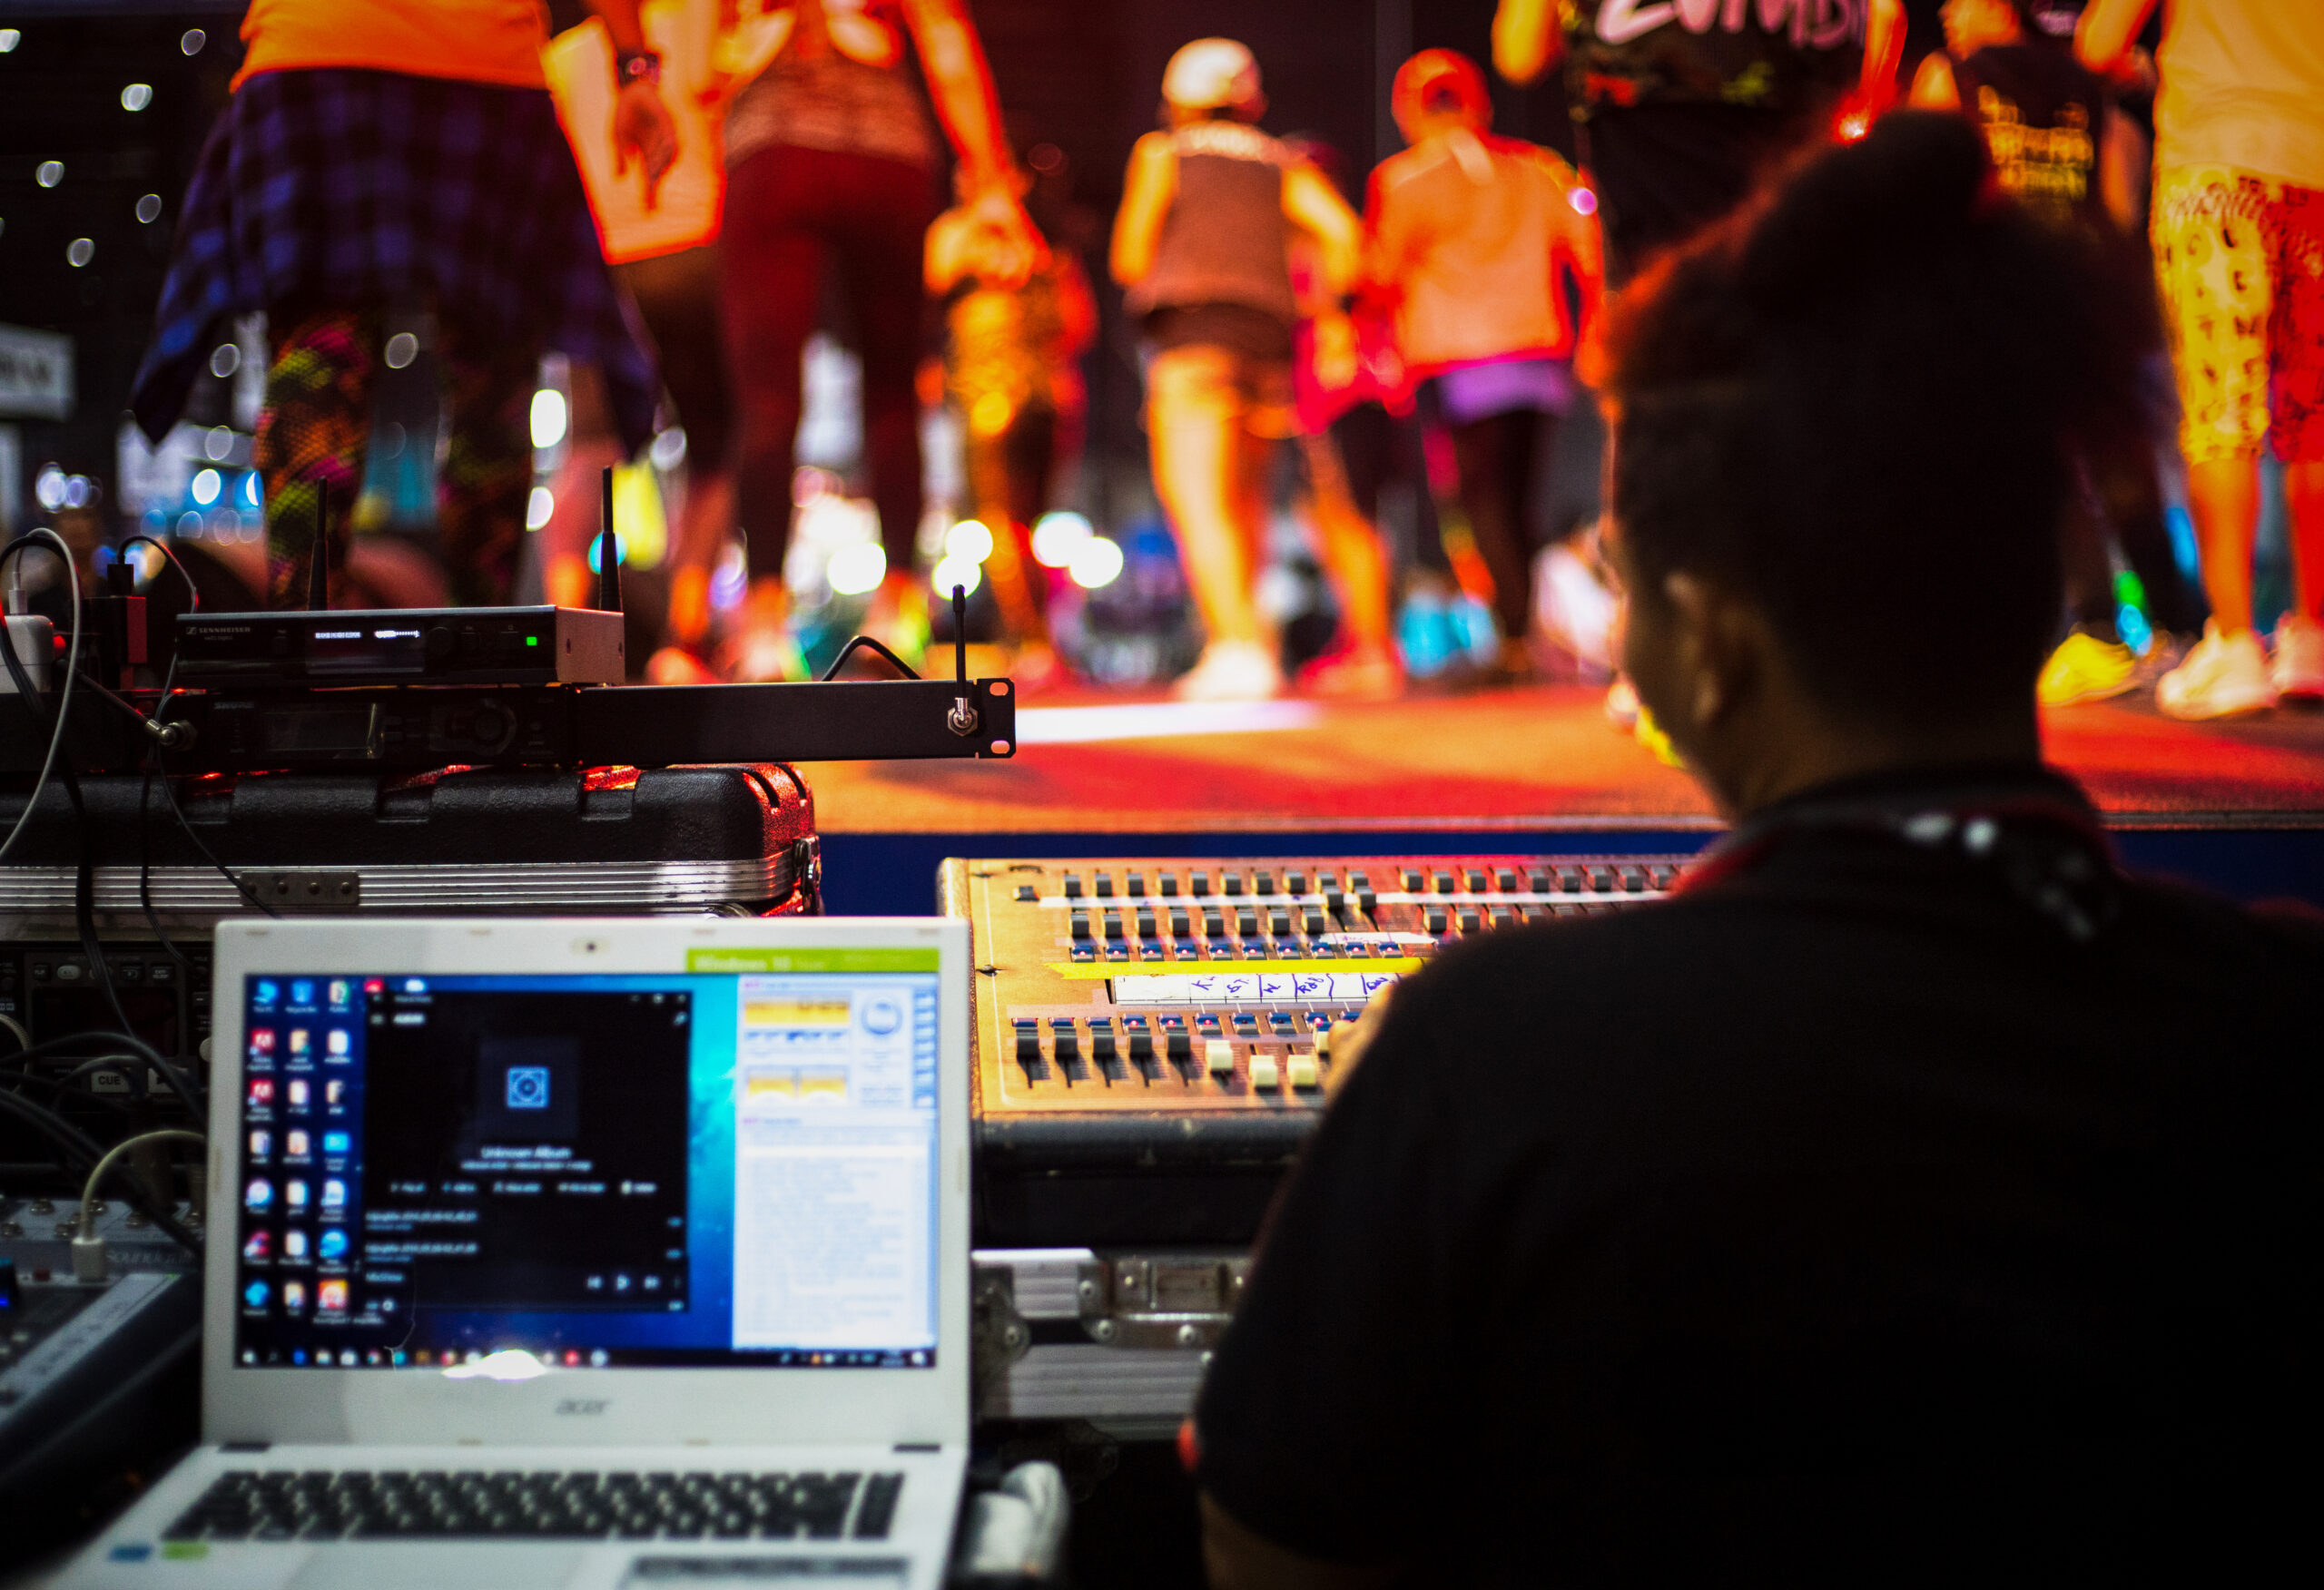 View from behind a sound technician at a mixing board with a laptop in the foreground and colorful stage lights illuminating performers in the background.